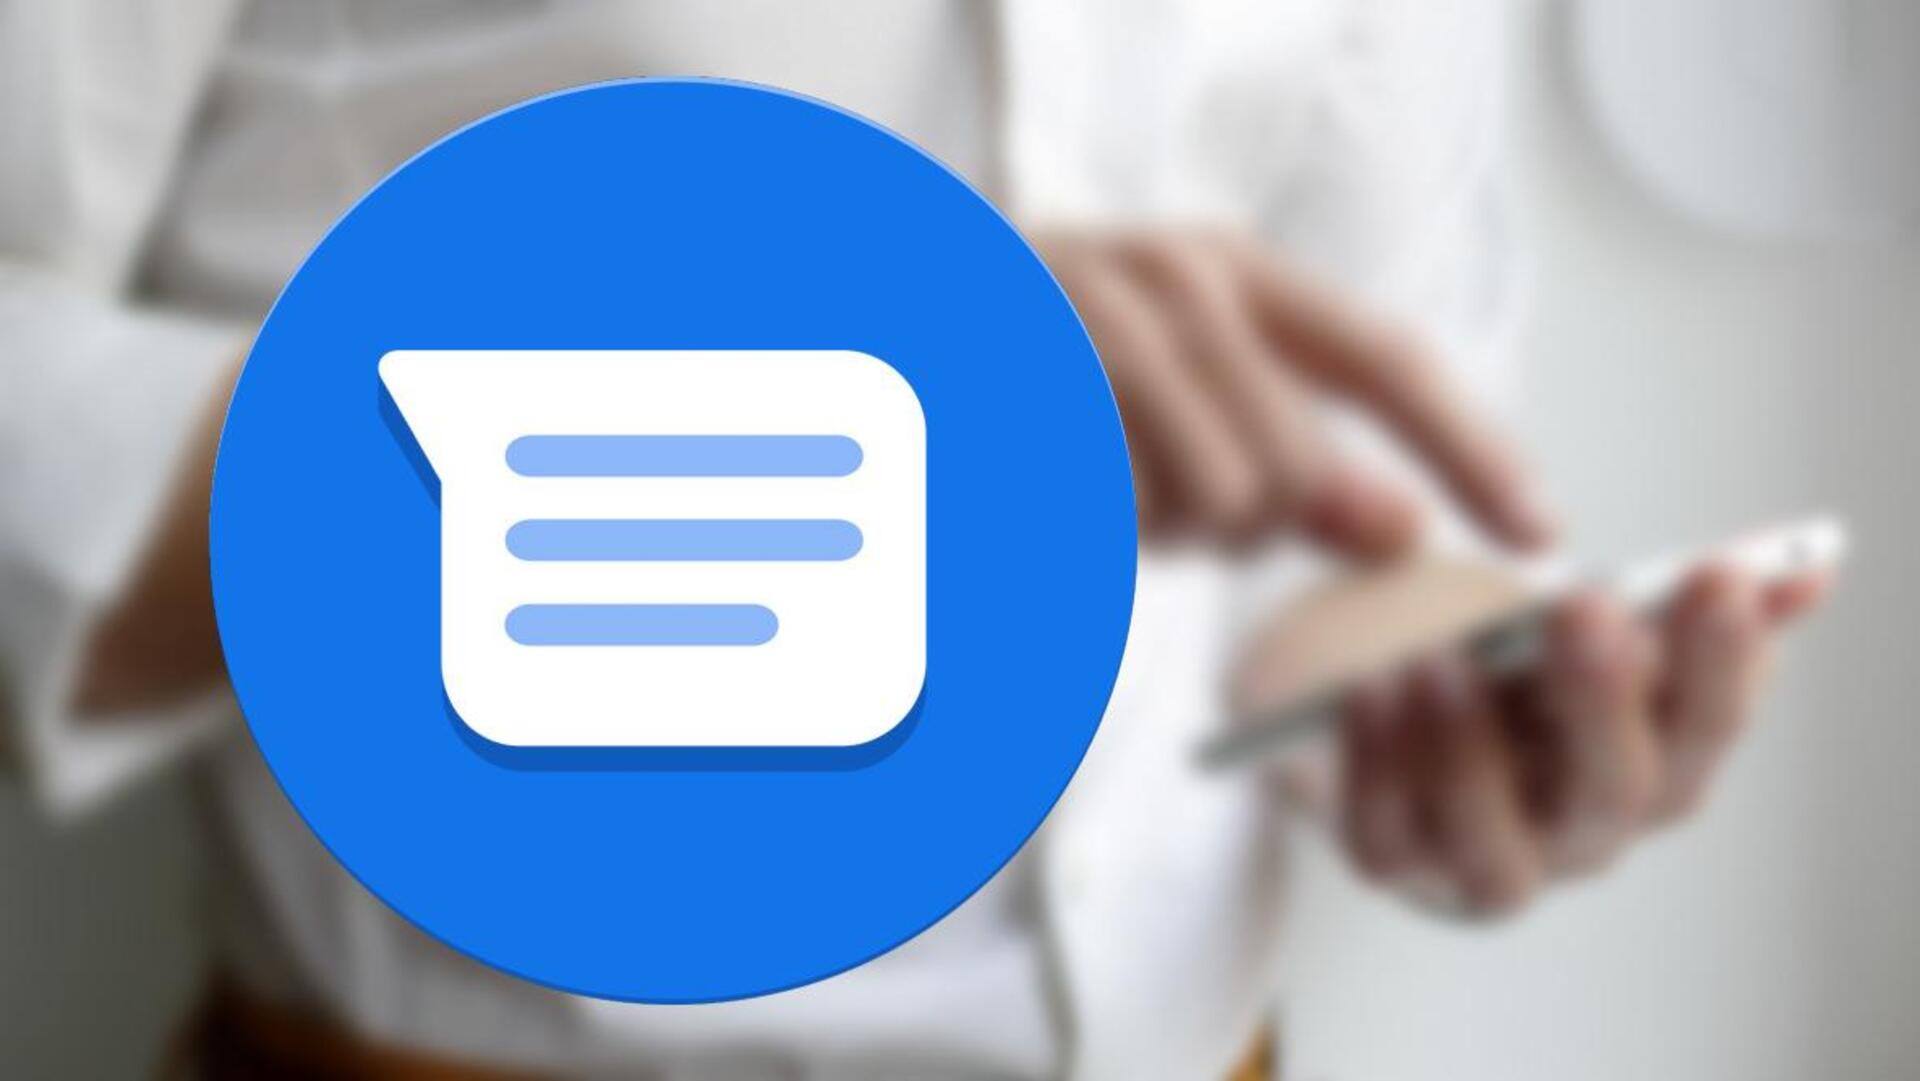 Google Messages may soon allow editing sent texts like WhatsApp